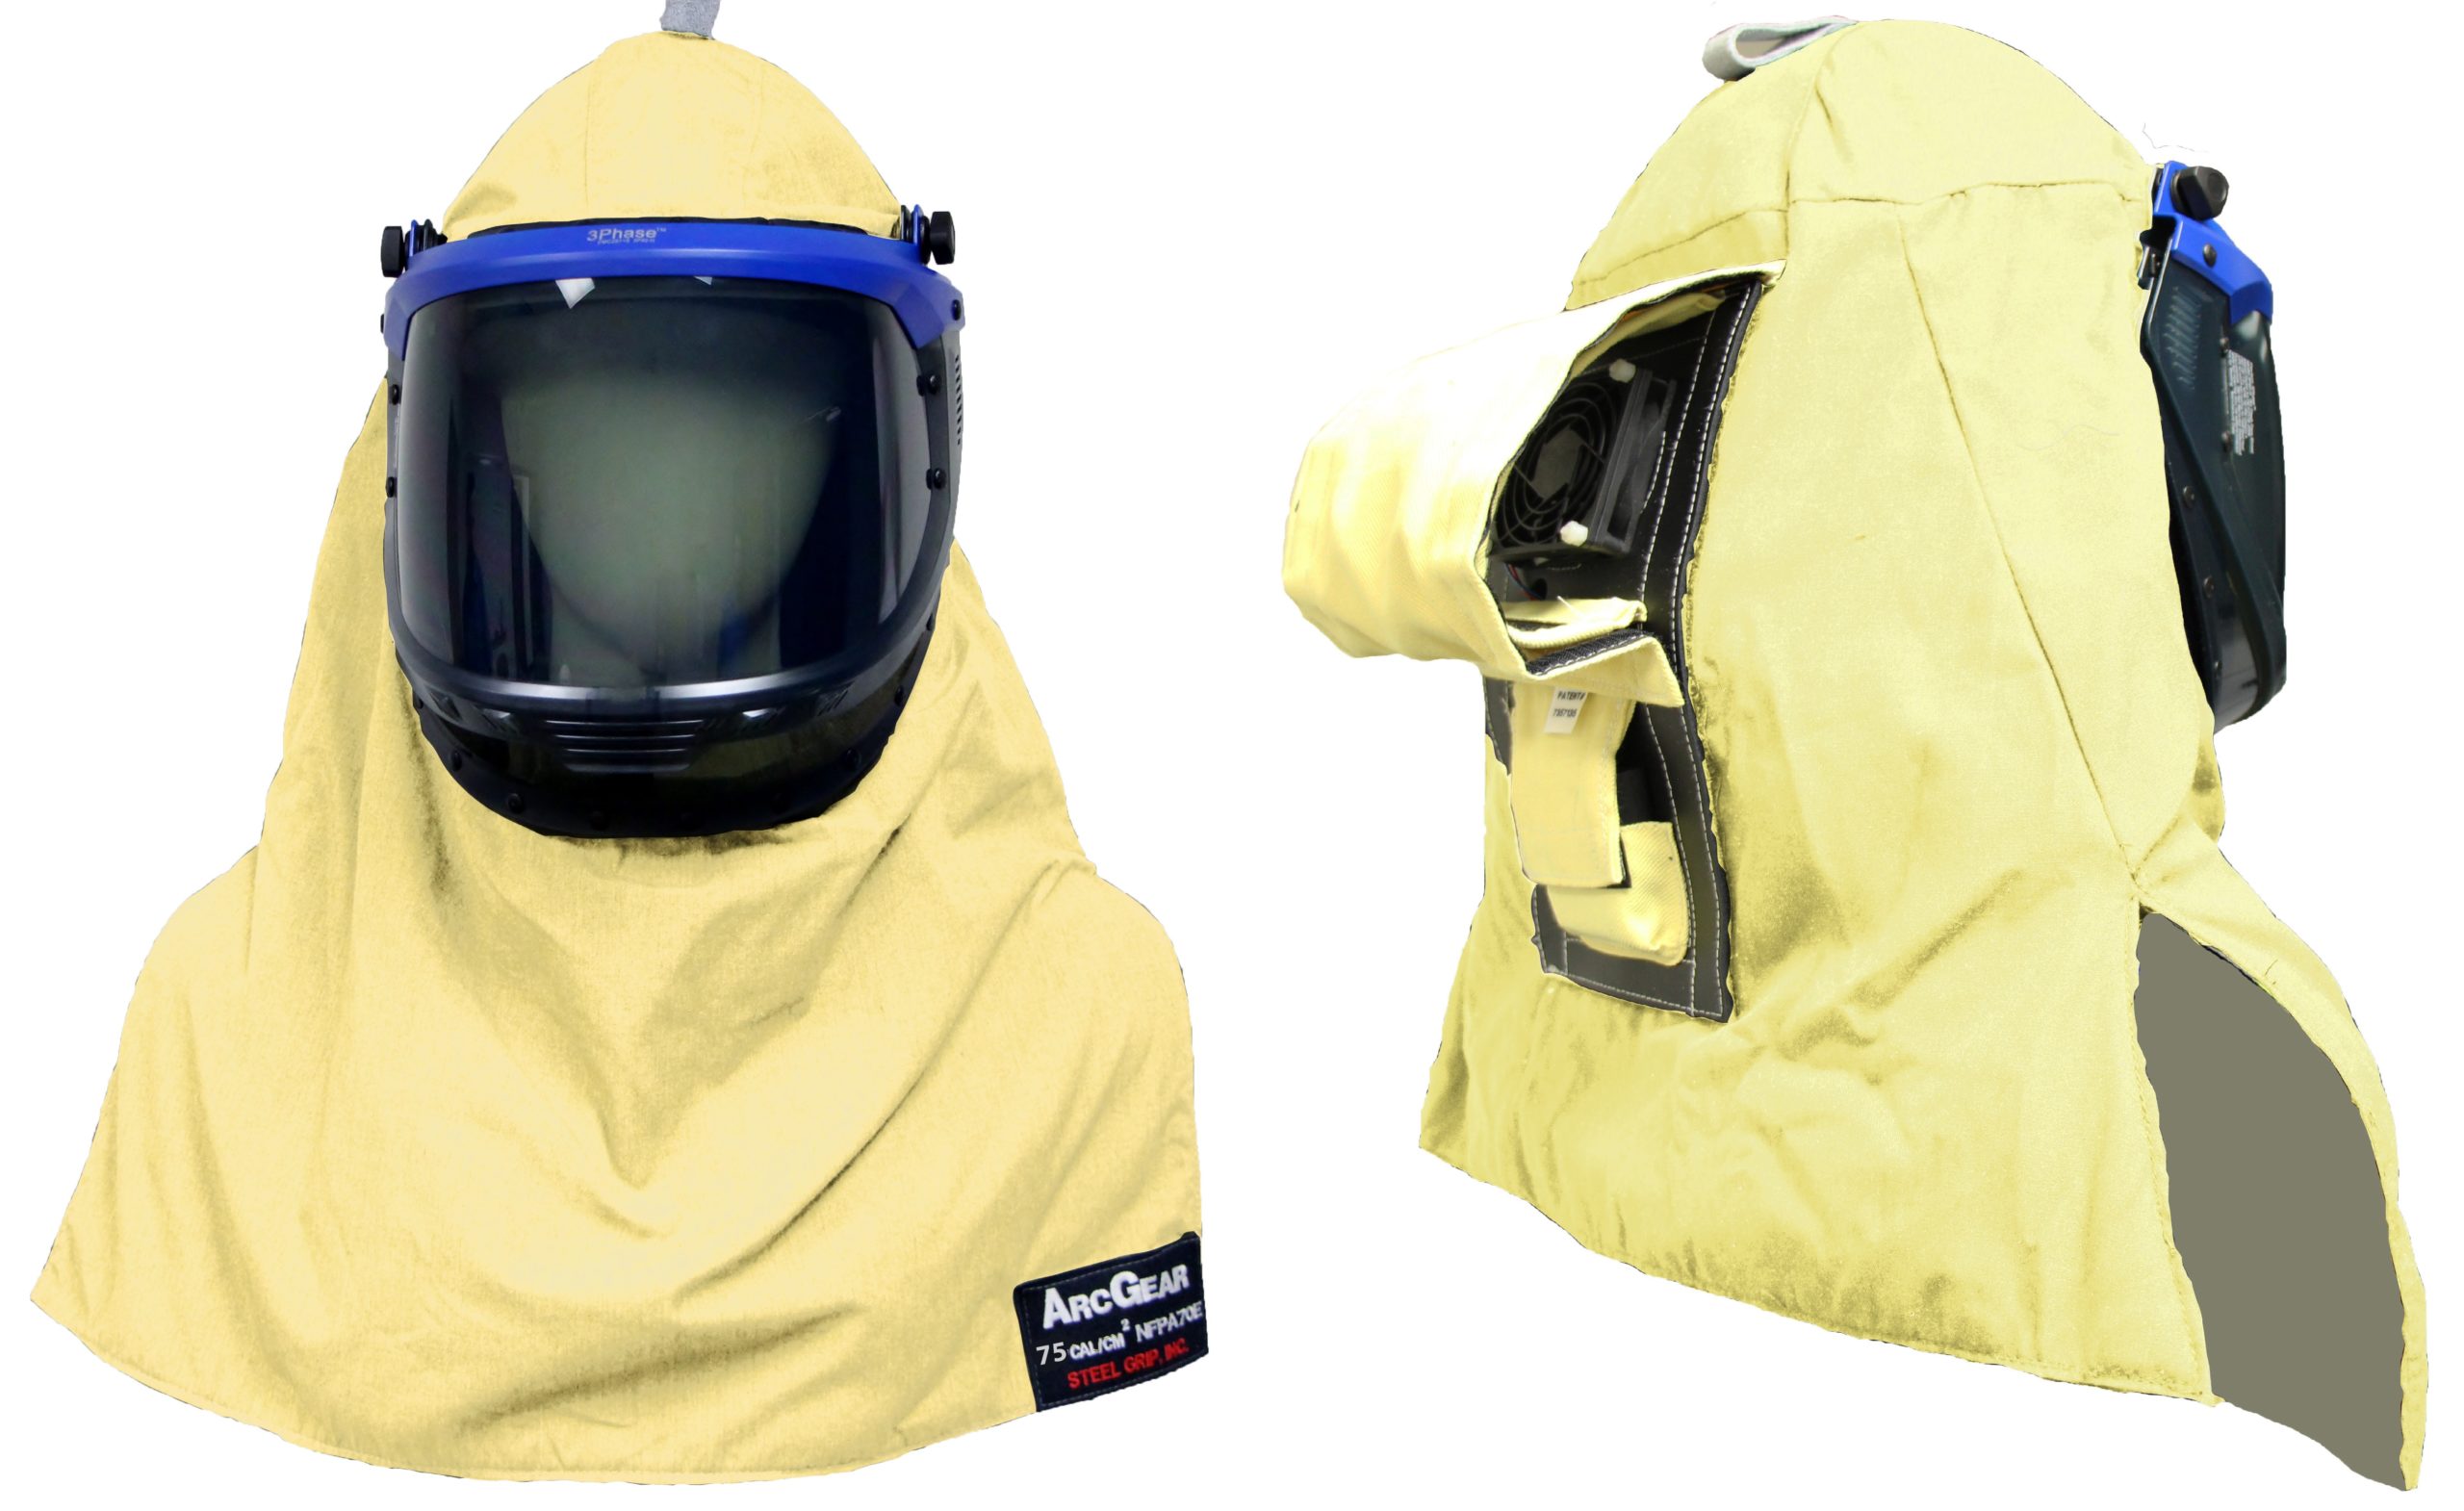 Product Spotlight: What’s New in PPE?